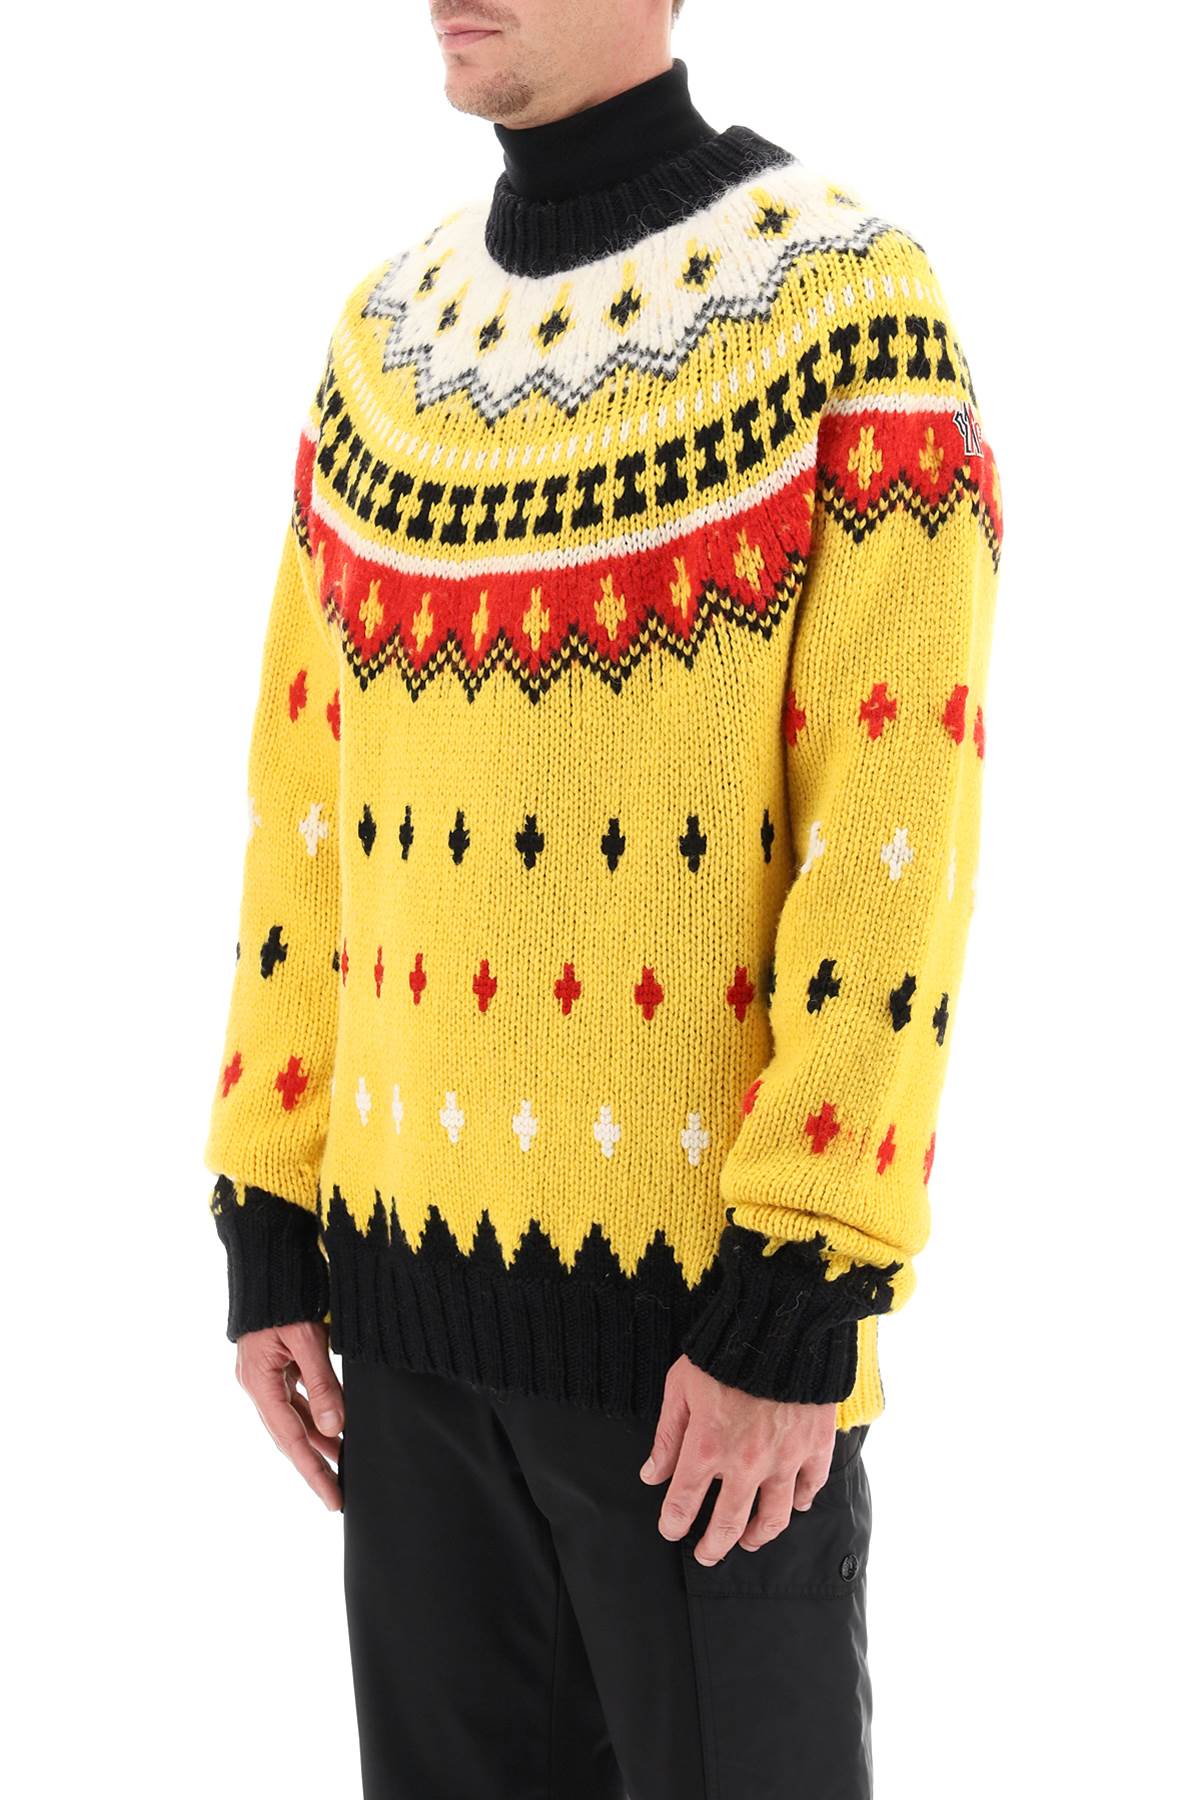 Moncler grenoble fair isle sweater in wool and alpaca